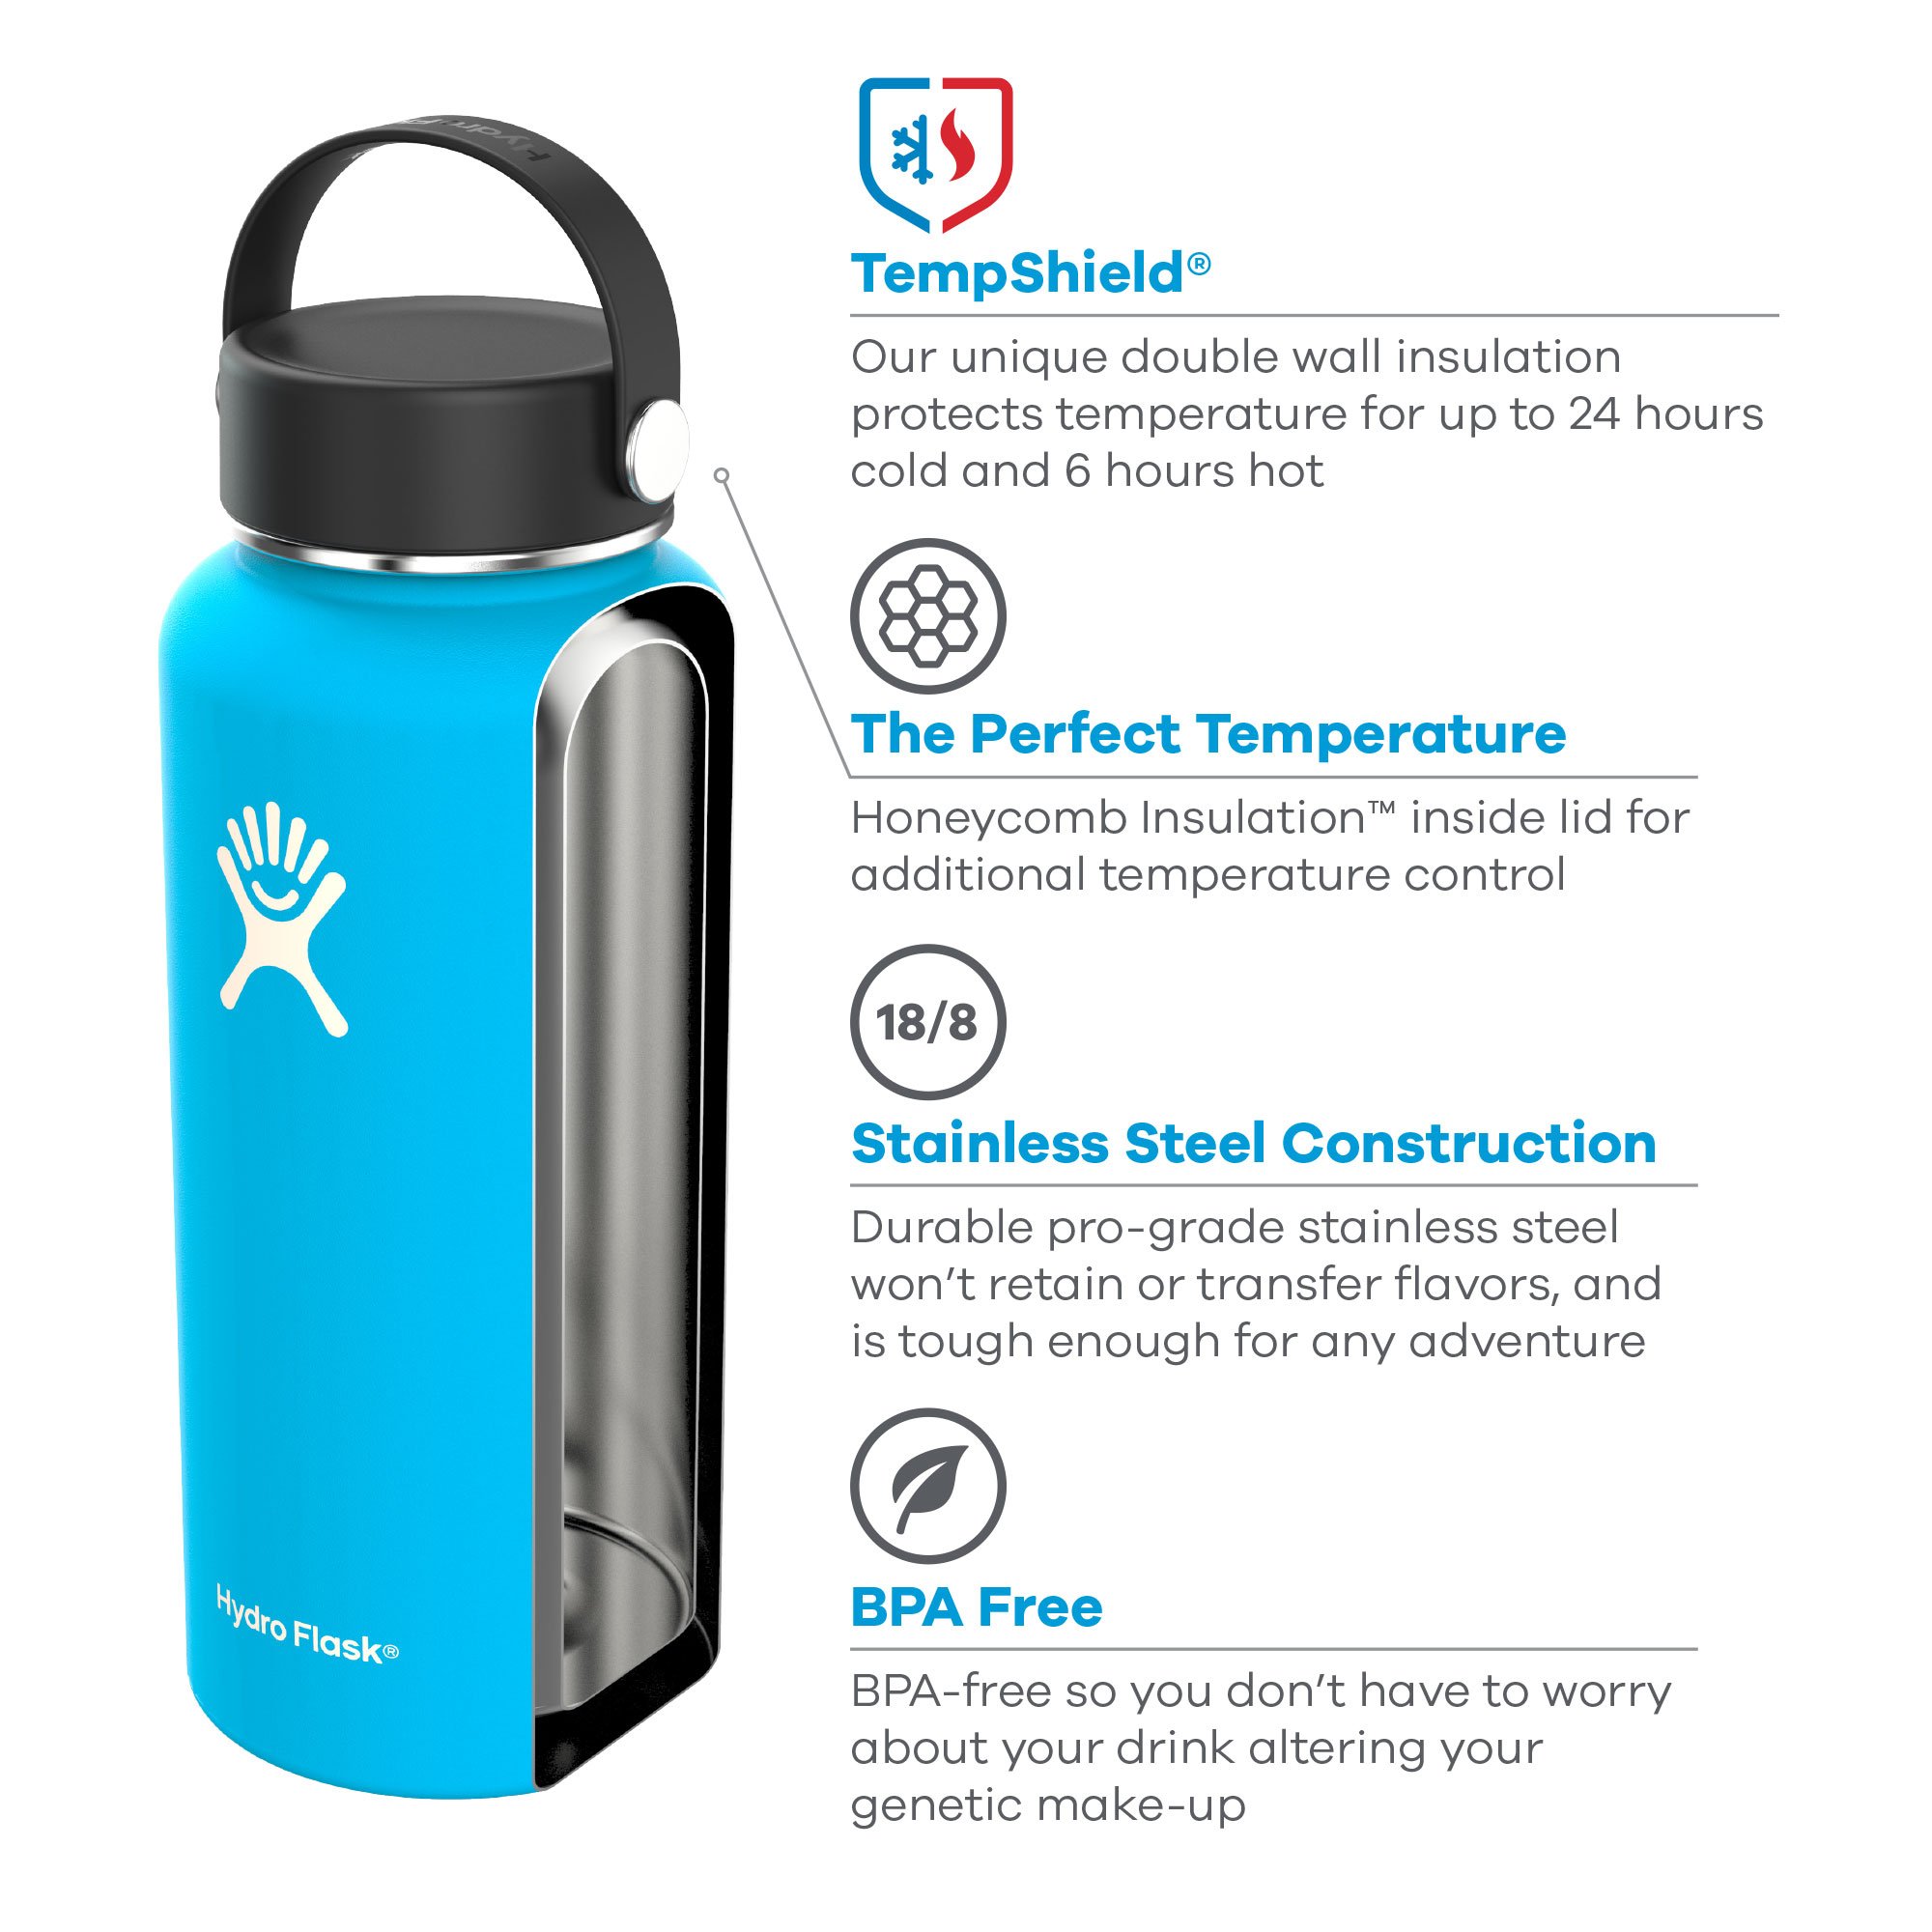 Hydro Flask Water Bottle - Stainless Steel & Vacuum Insulated - Wide Mouth with Leak Proof Flex Cap - 32 oz, Black